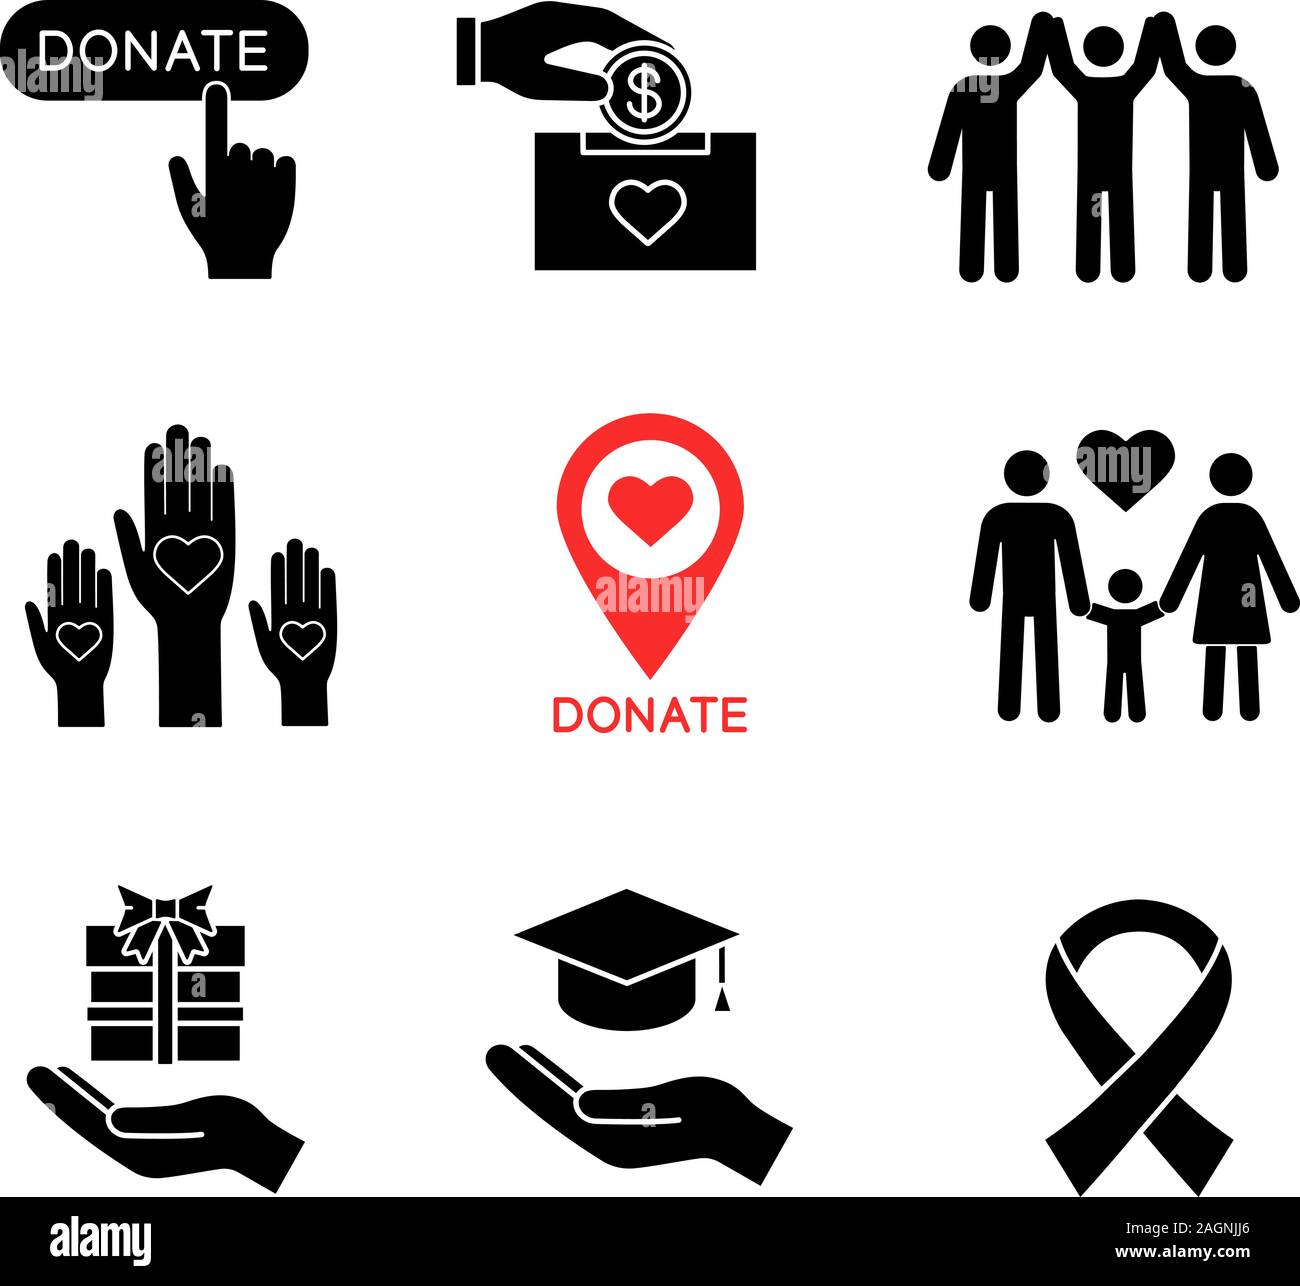 Charity Glyph Icons Set Silhouette Symbols Donate Button